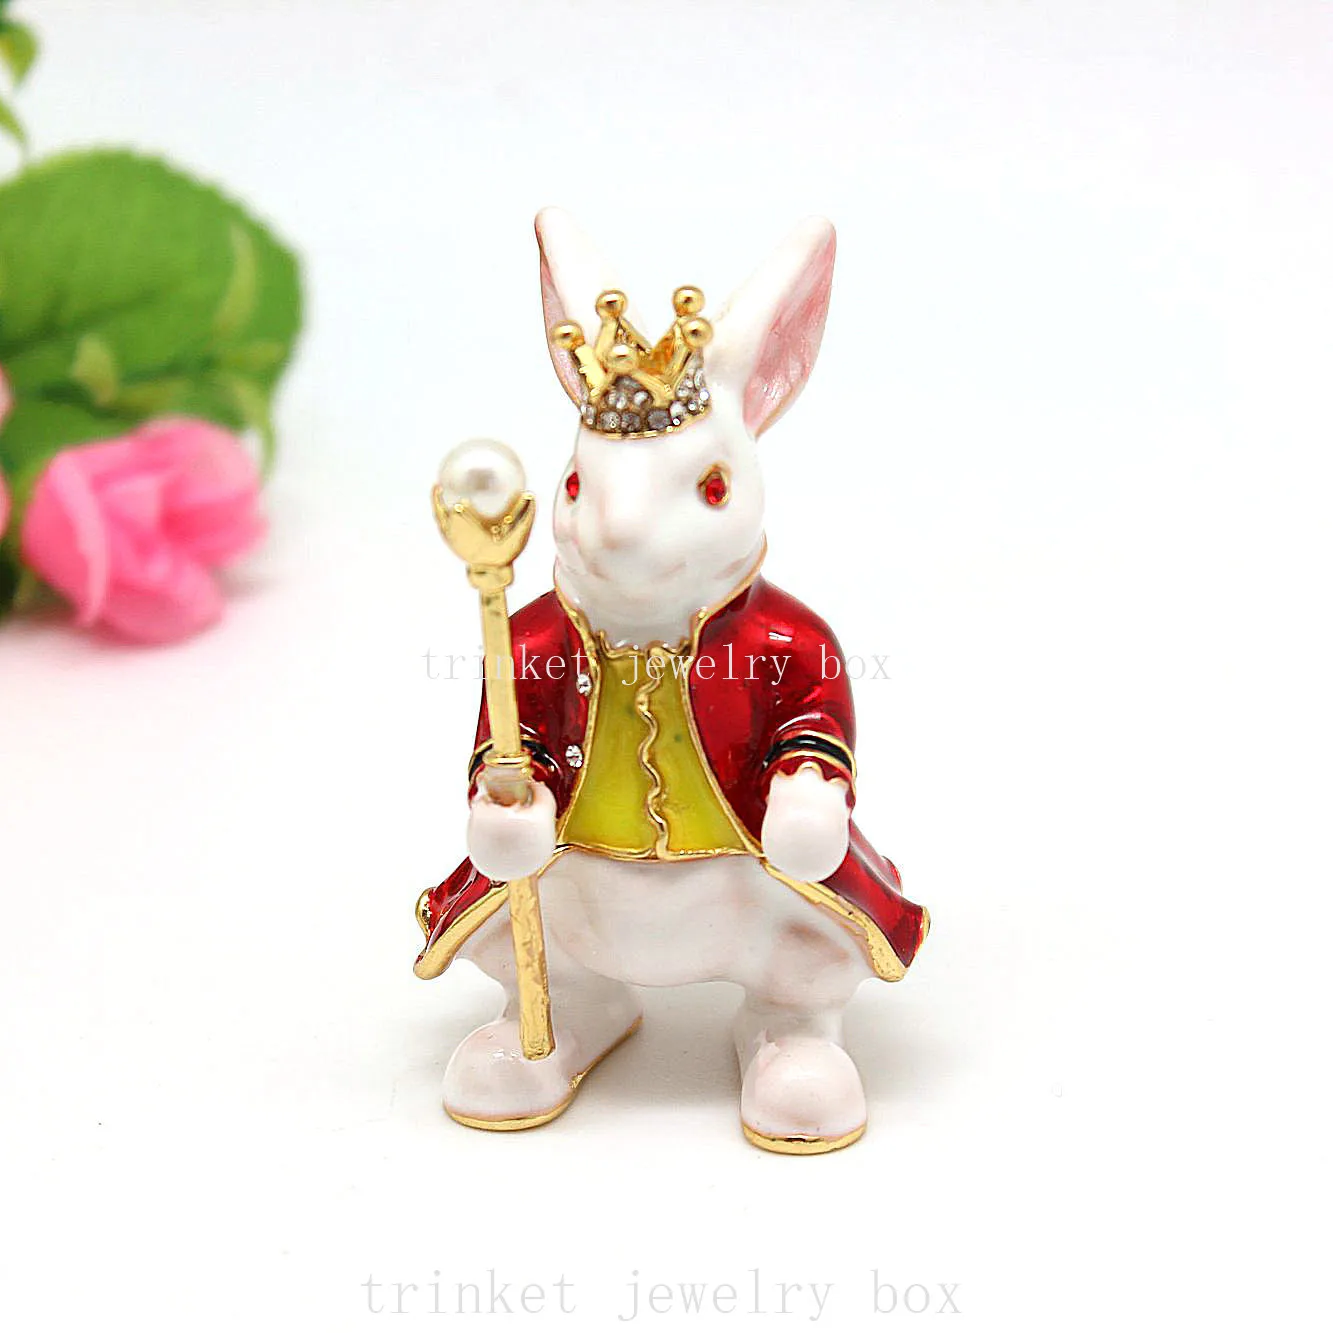 Mouse King Animal Trinket Jewelry Box Metal Mouse Figurines Crafts Ring Holder